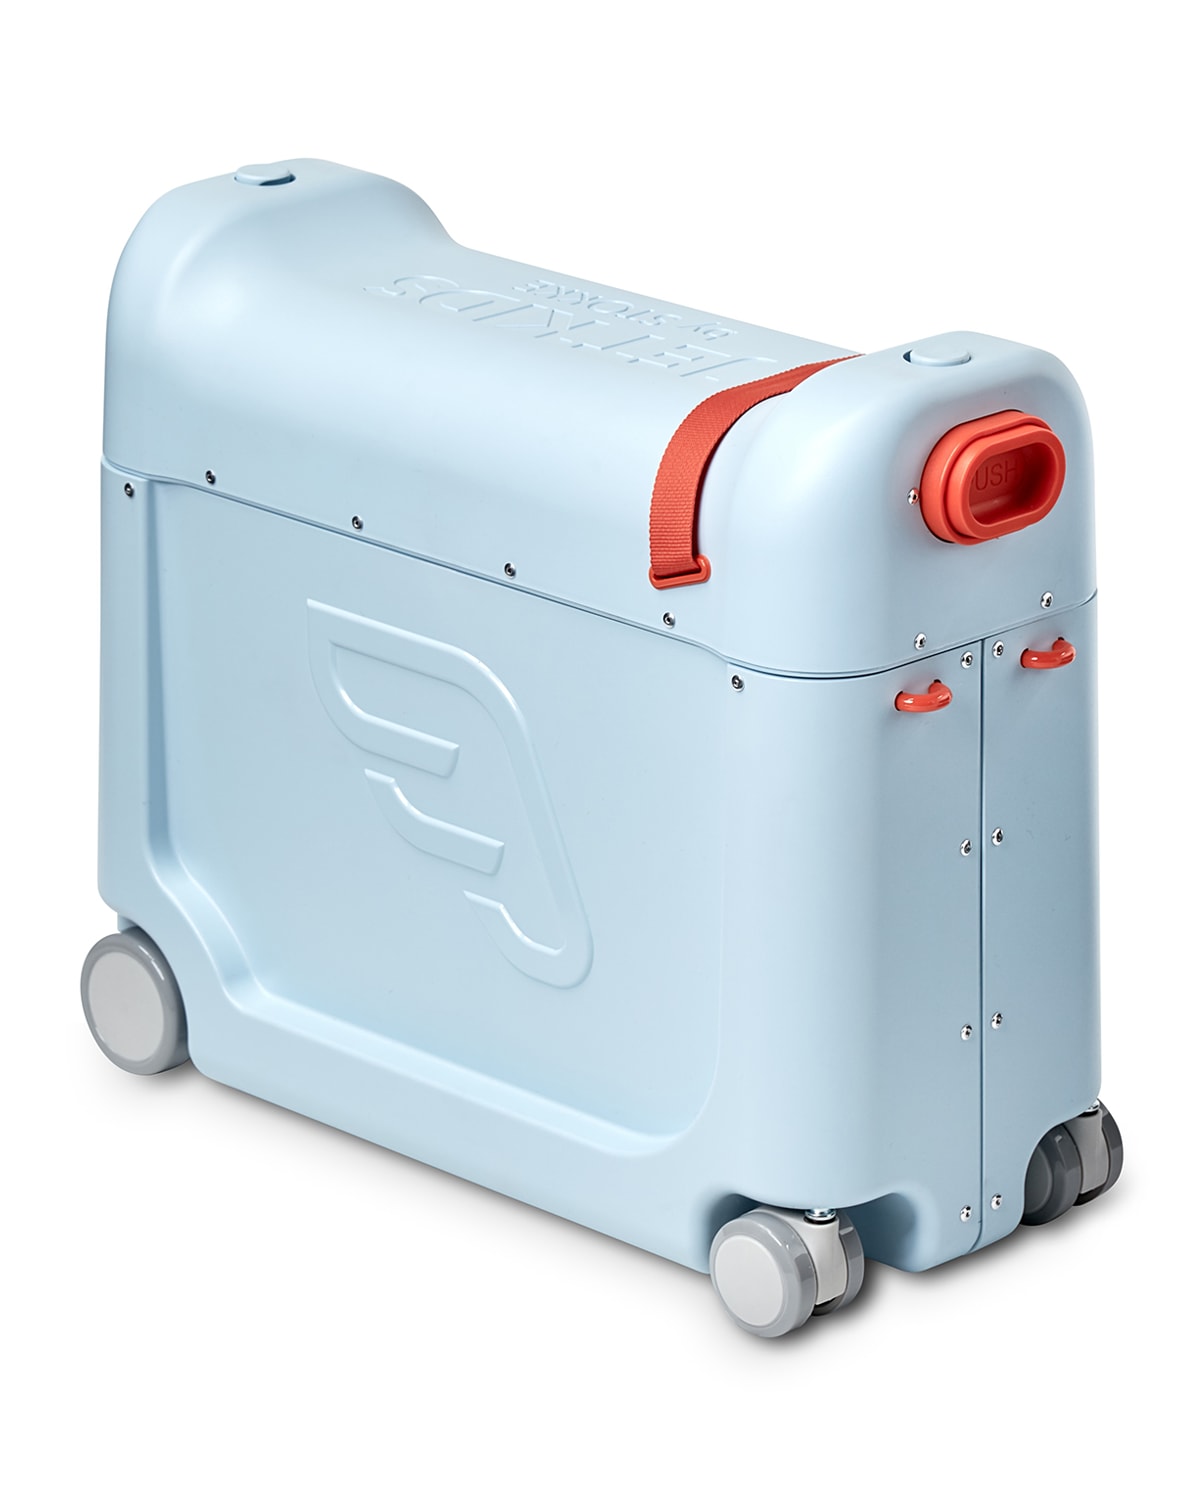 STOKKE BEDBOX CARRY-ON SUITCASE